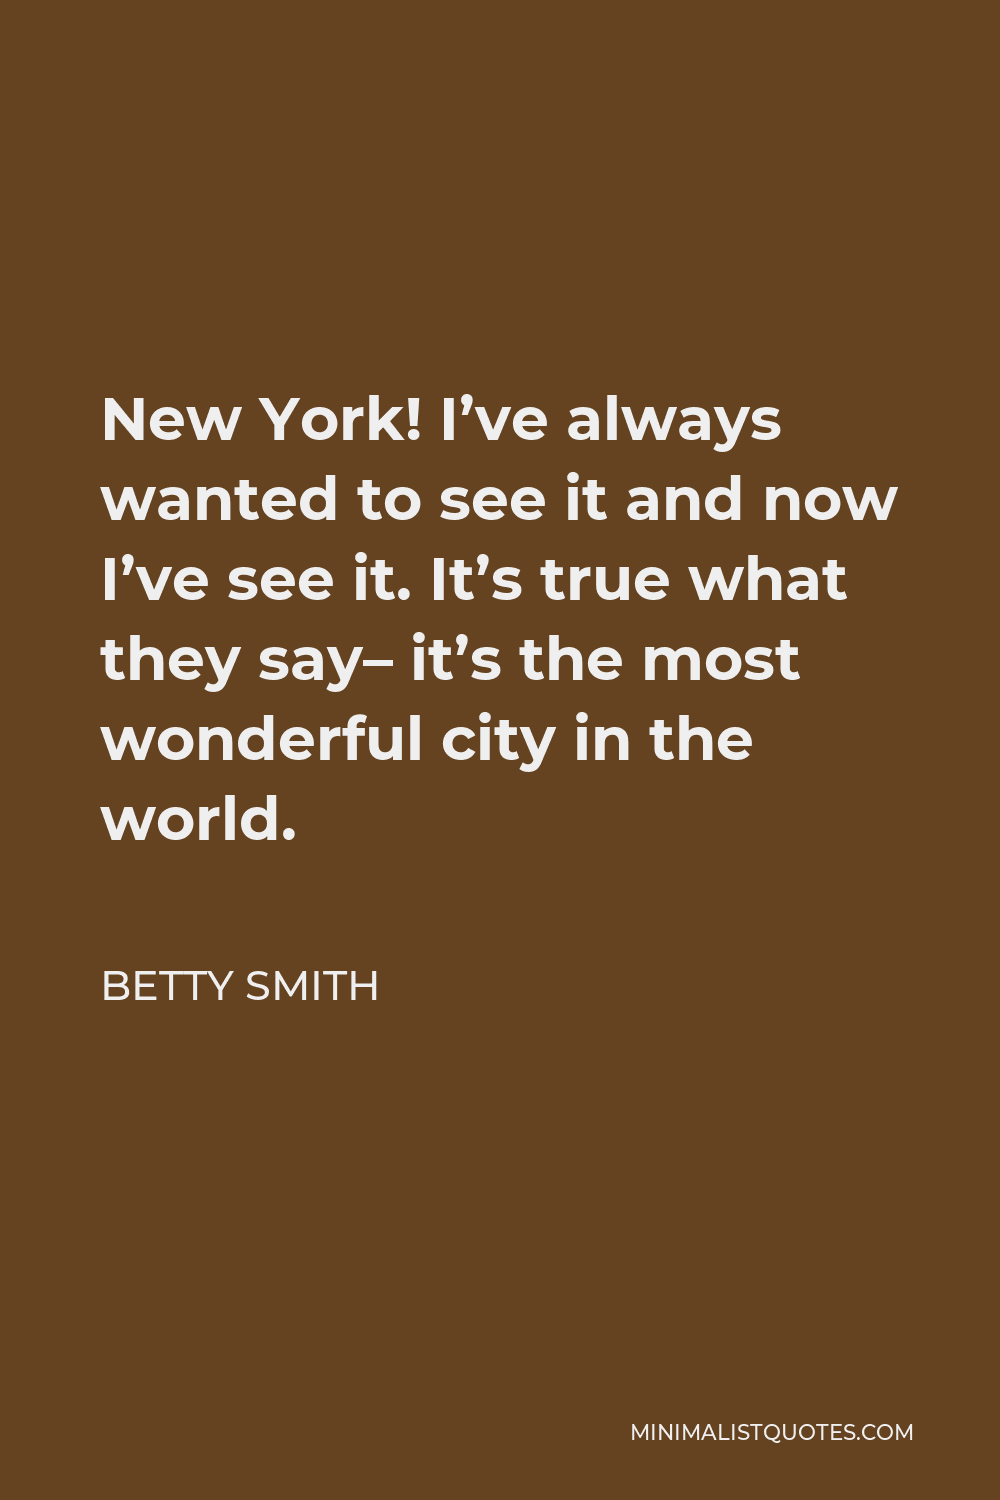 Betty Smith Quote - New York! I’ve always wanted to see it and now I’ve see it. It’s true what they say– it’s the most wonderful city in the world.